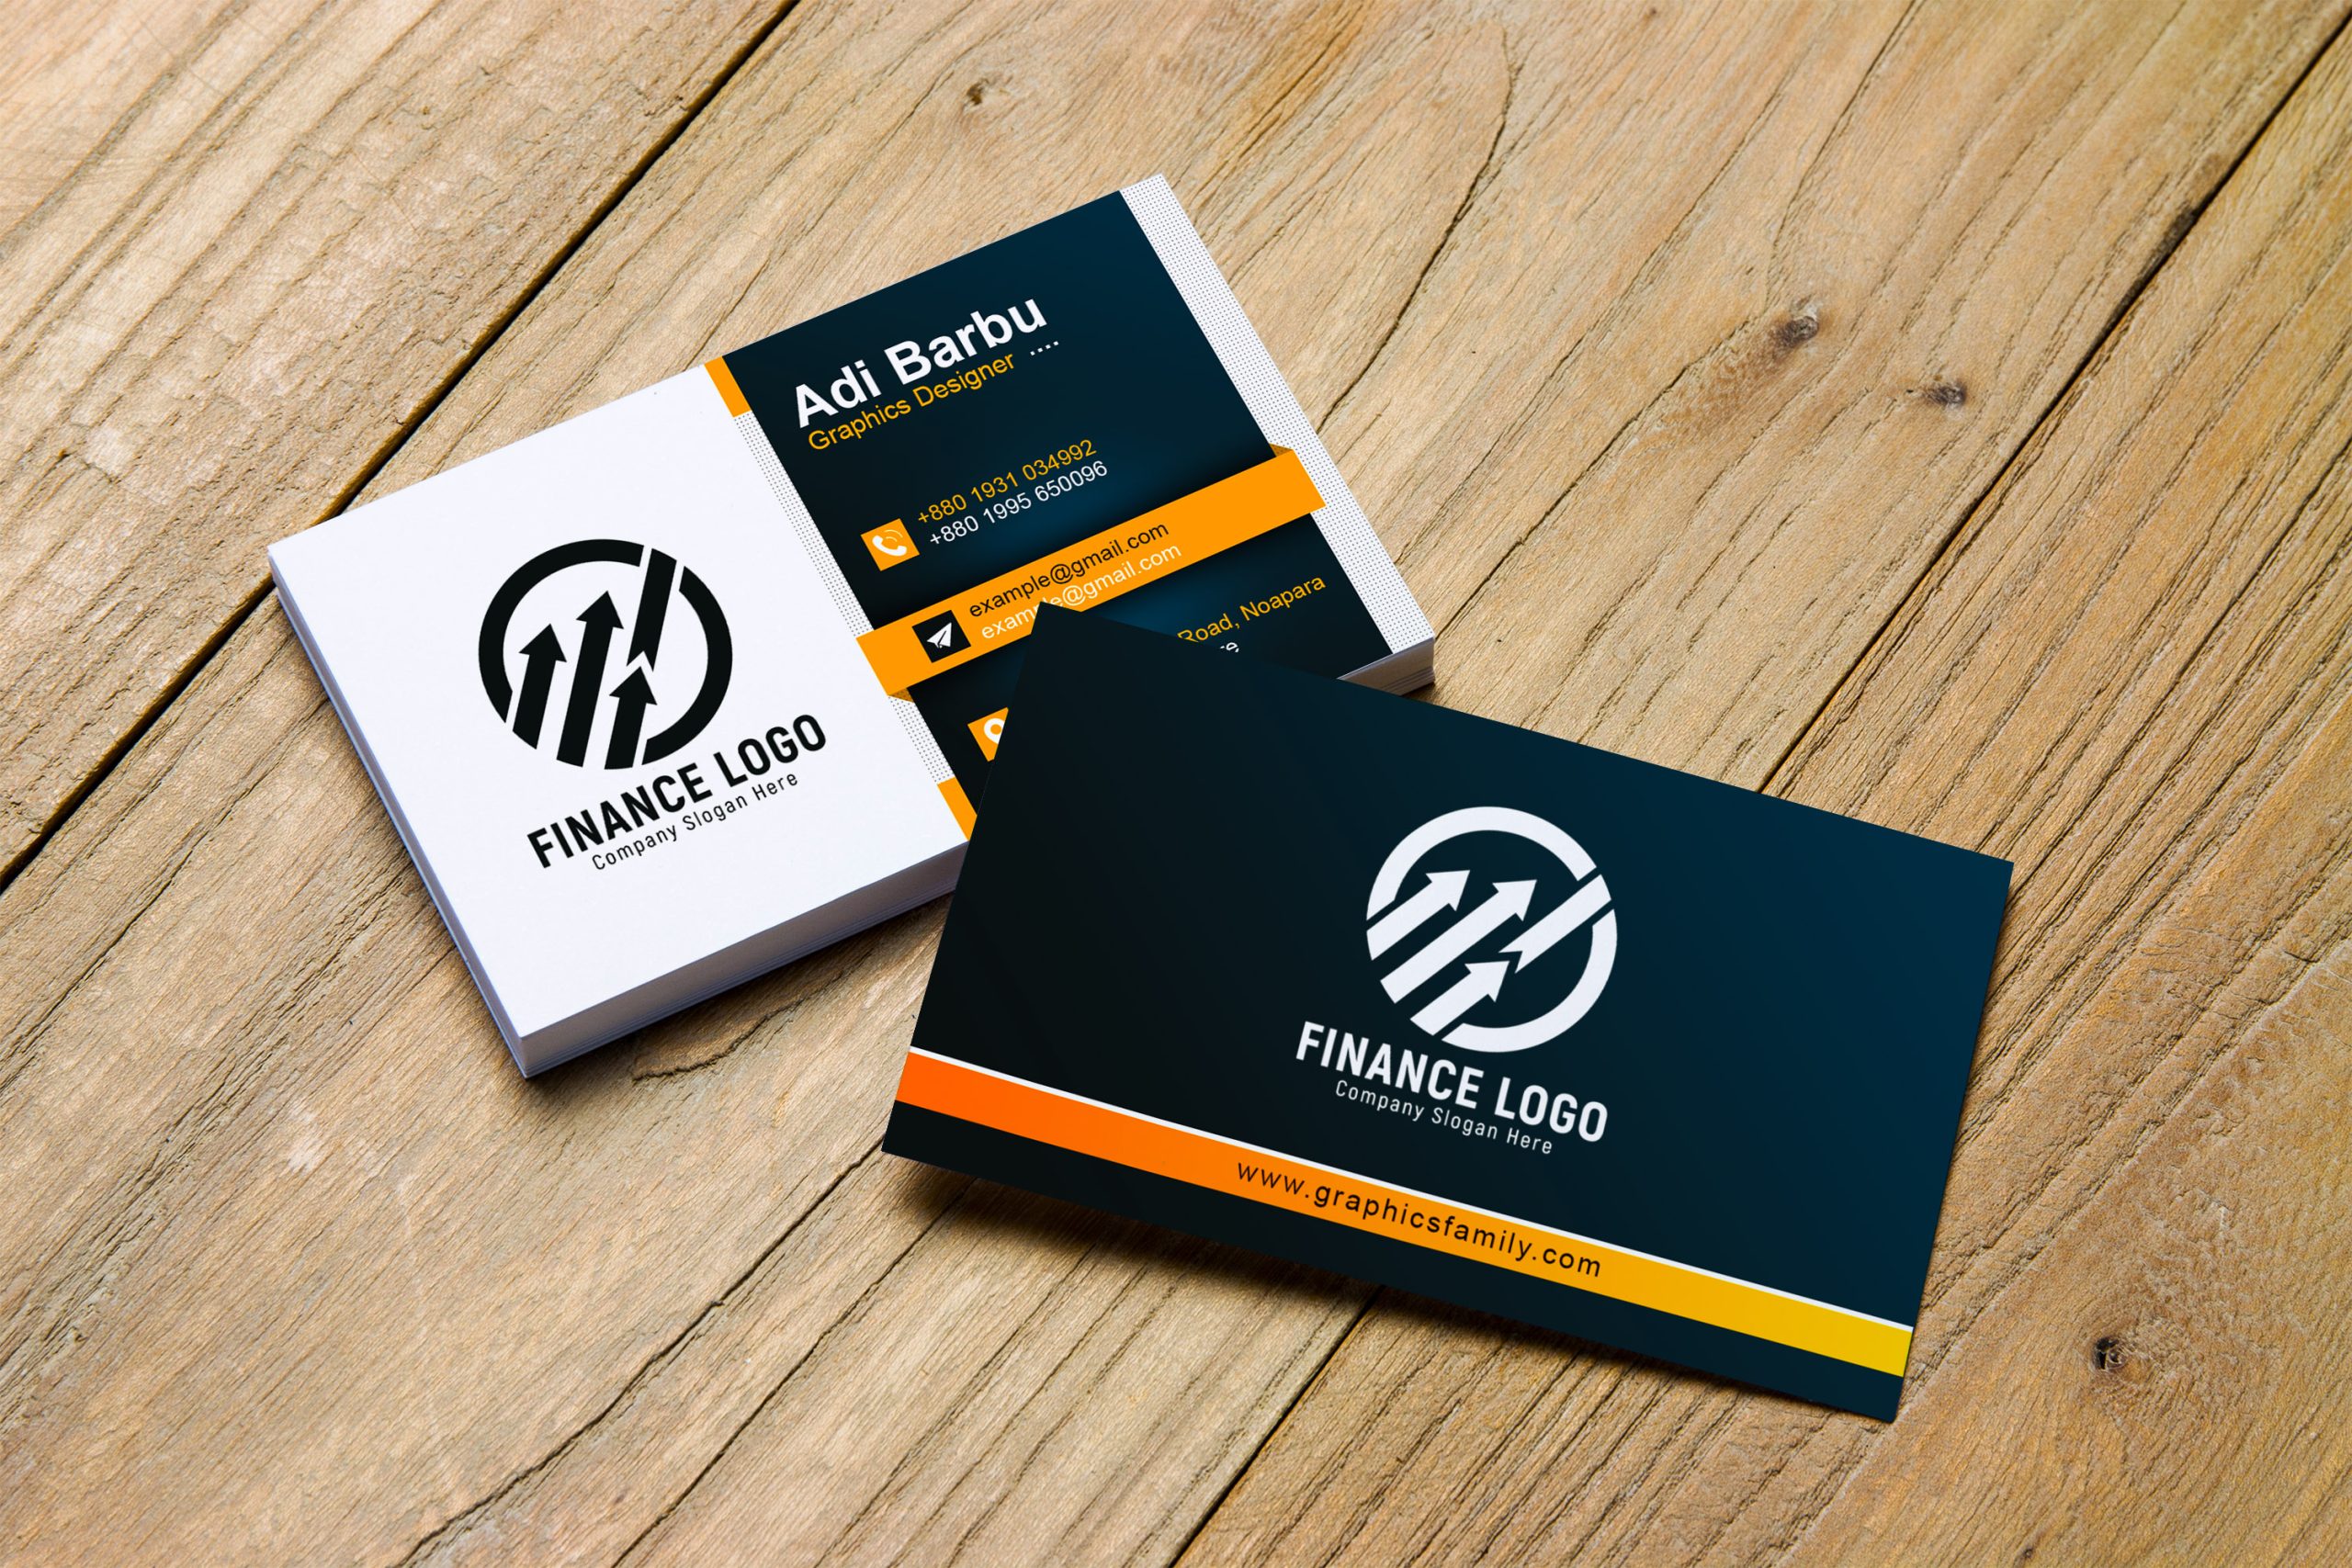 finance-business-card-design-graphicsfamily